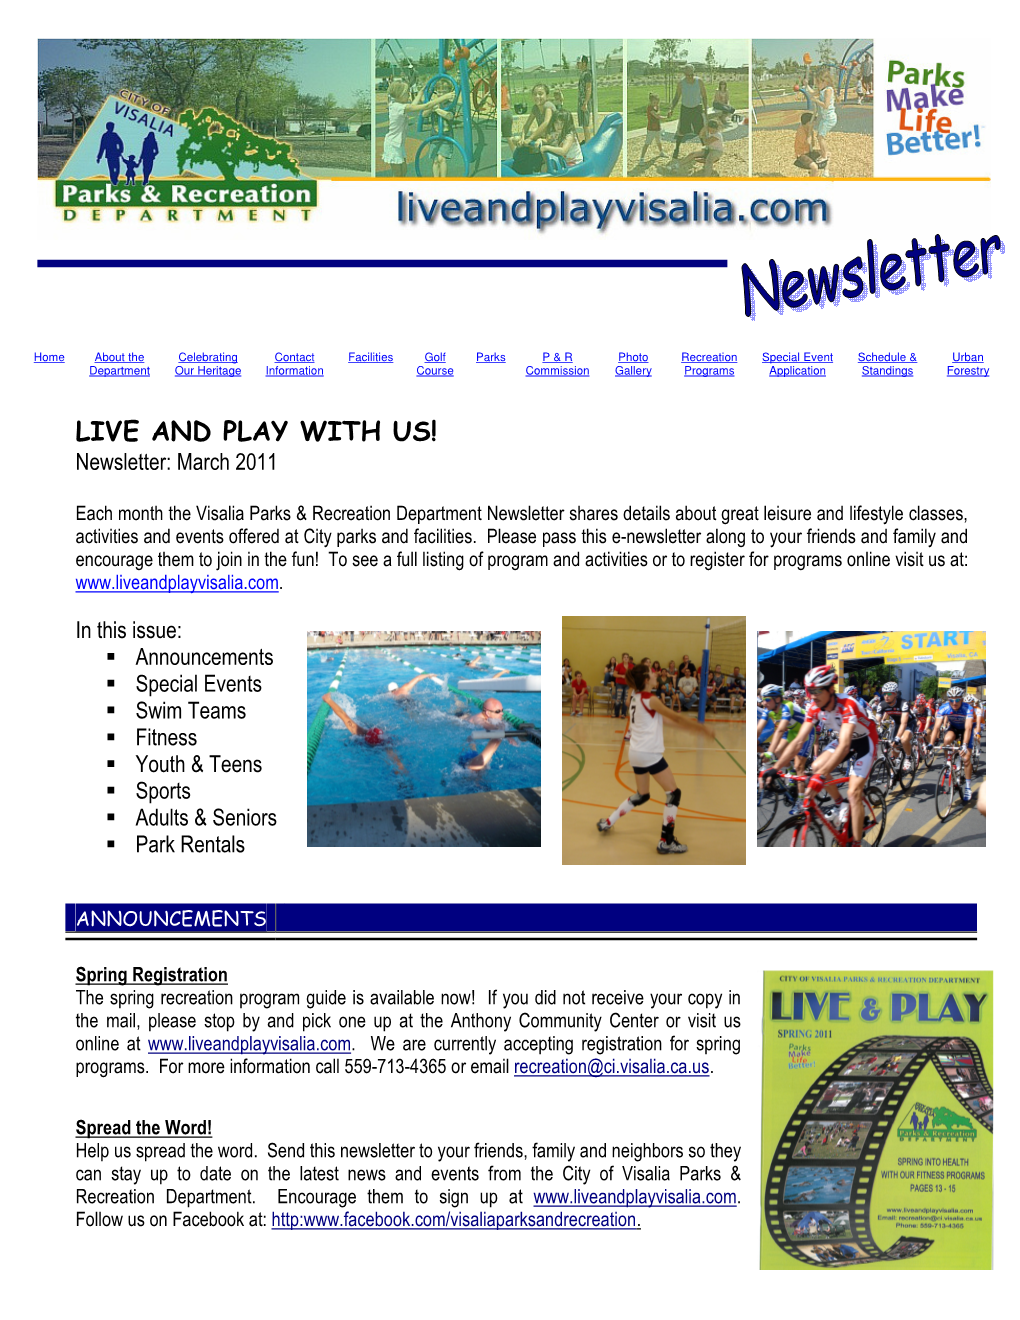 LIVE and PLAY with US! Newsletter: March 2011